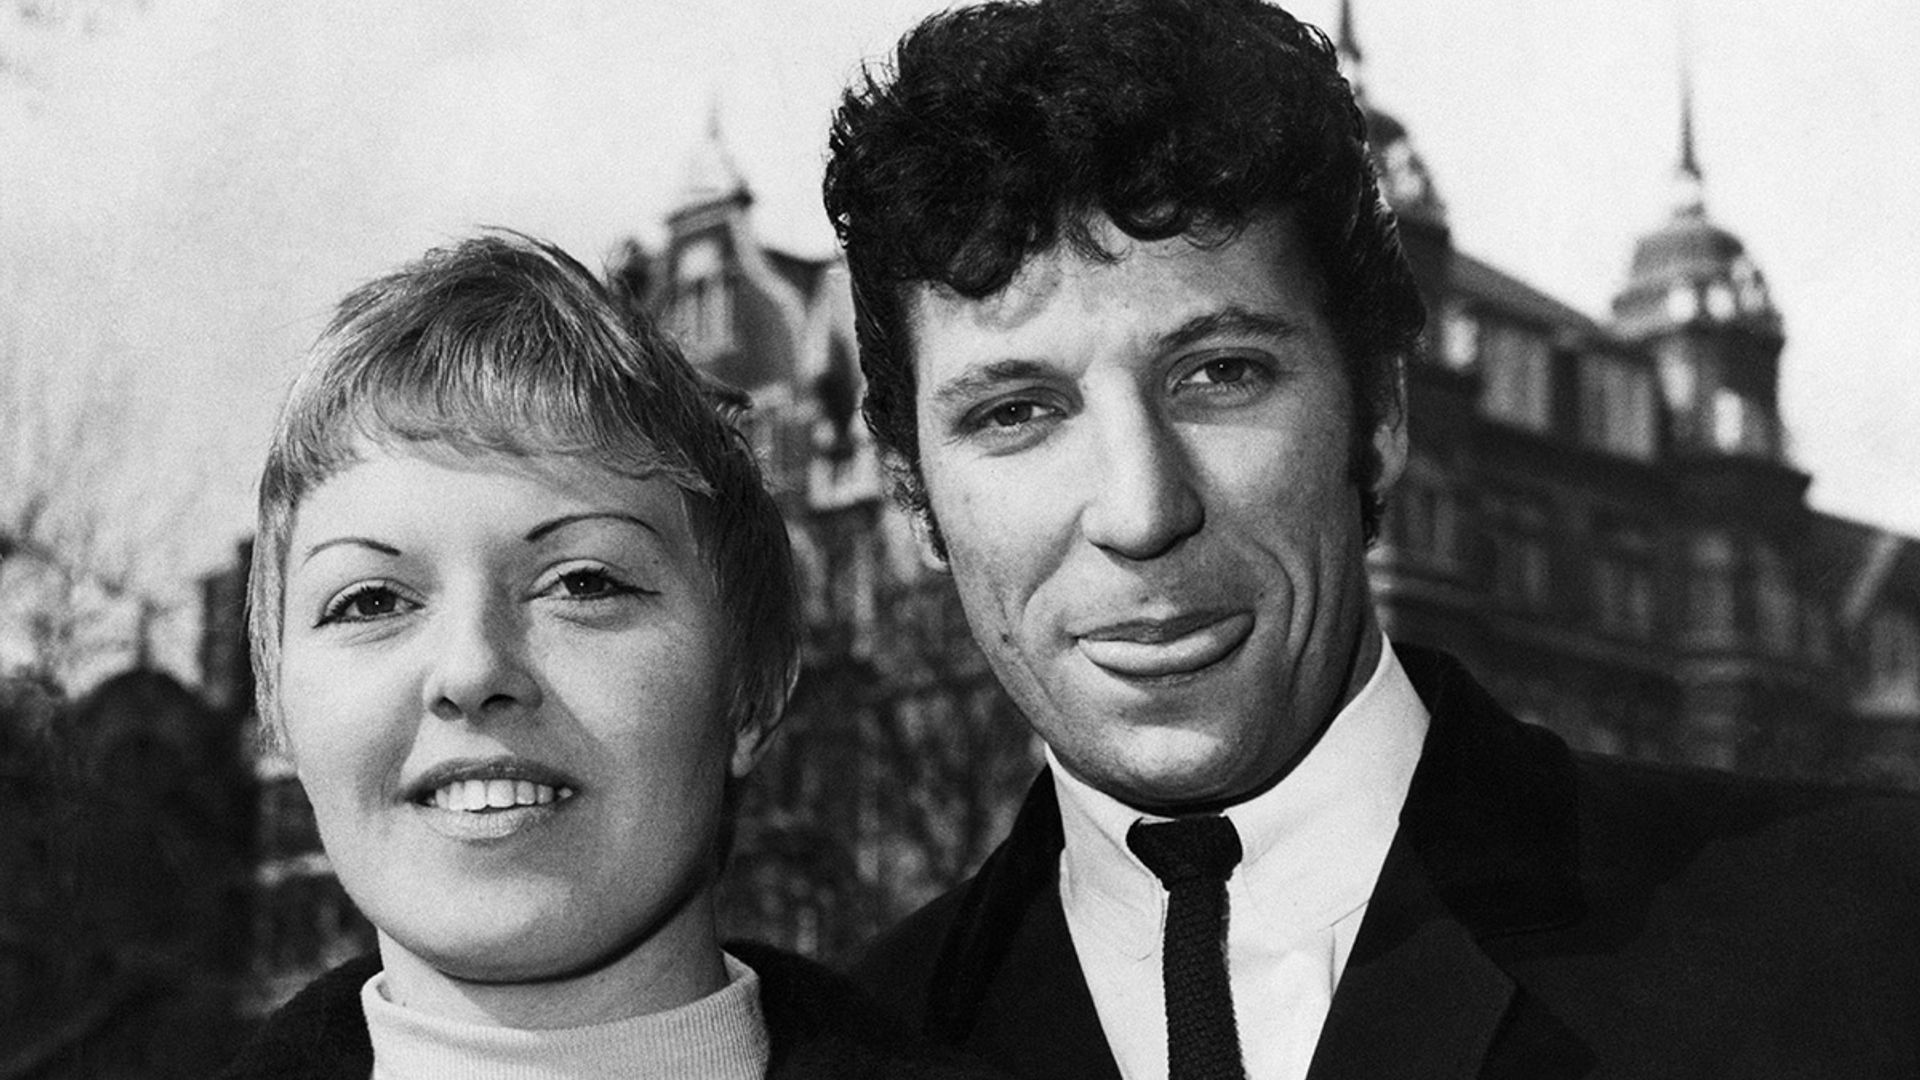 Sir Tom Jones makes a heartbreaking confession about his late wife Linda.